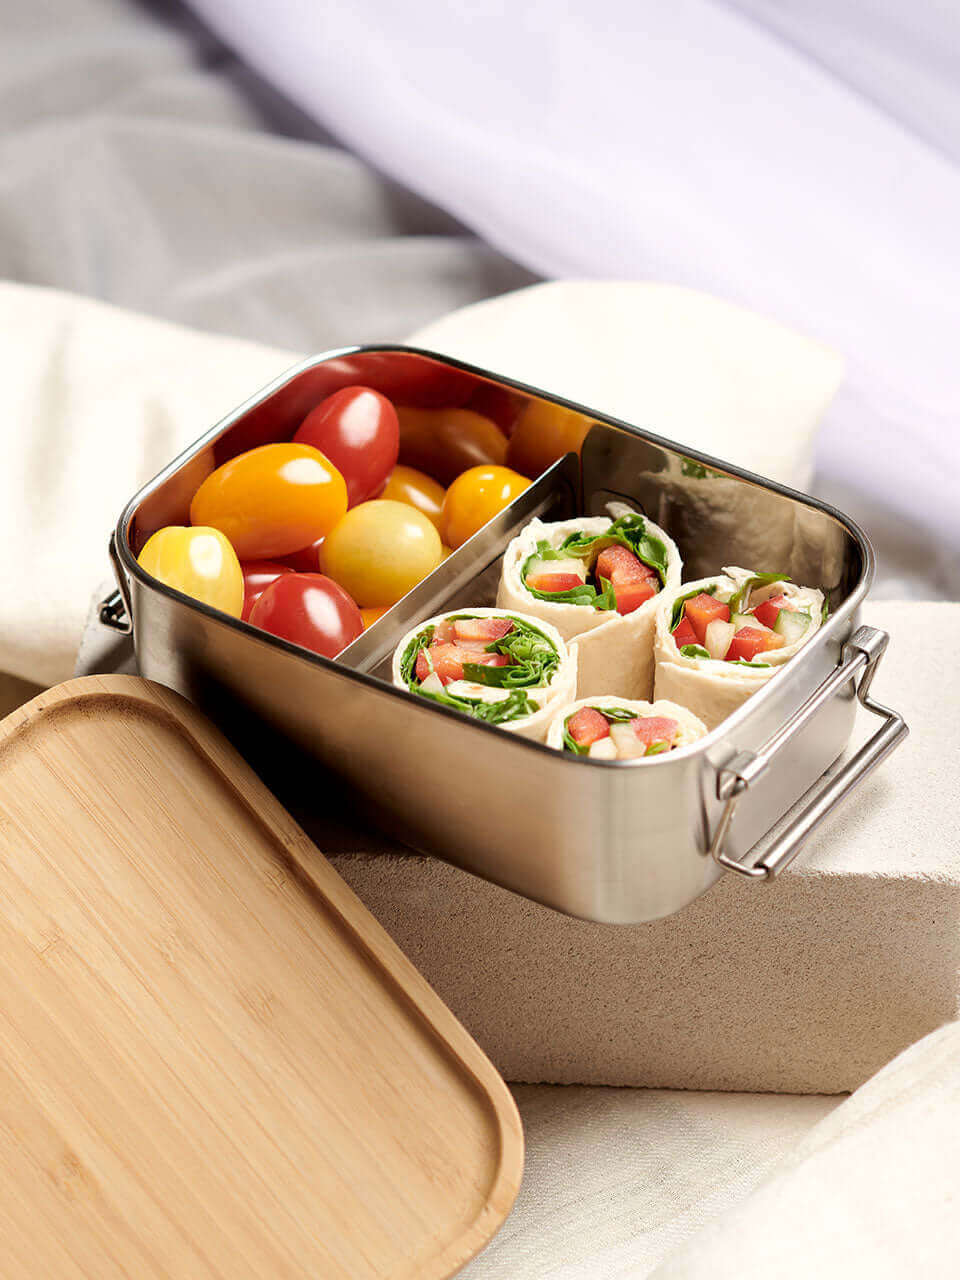  Bamboo and Stainless Steel Lunch Box filled with veggies